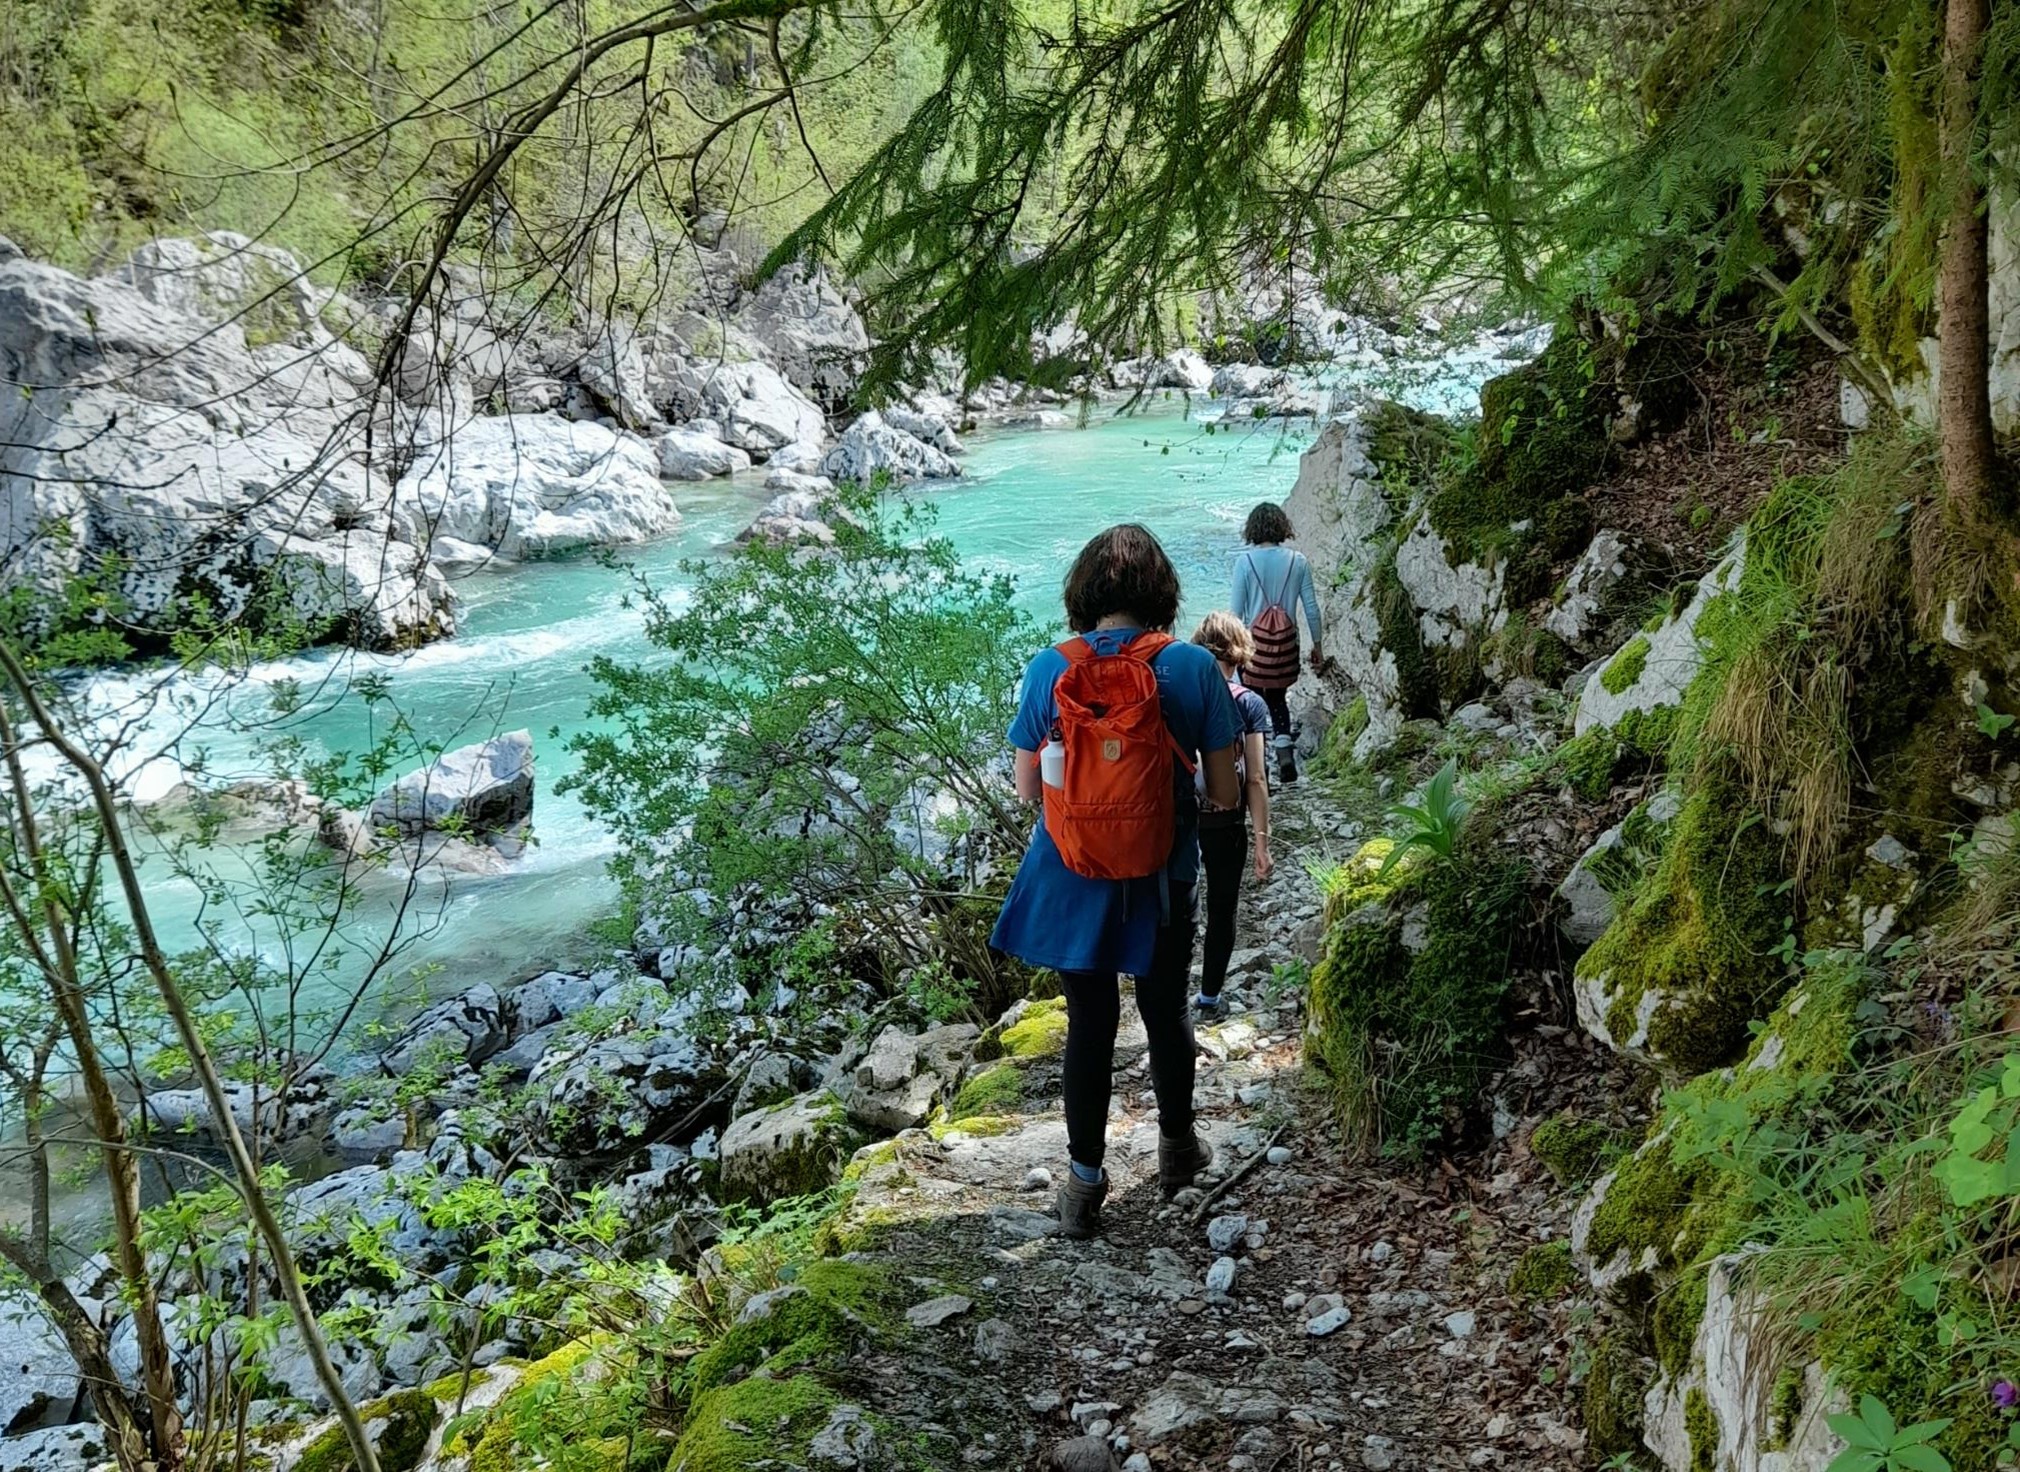 People walking down a rocky trail next to a blue river in Slovenia surrounded by green trees